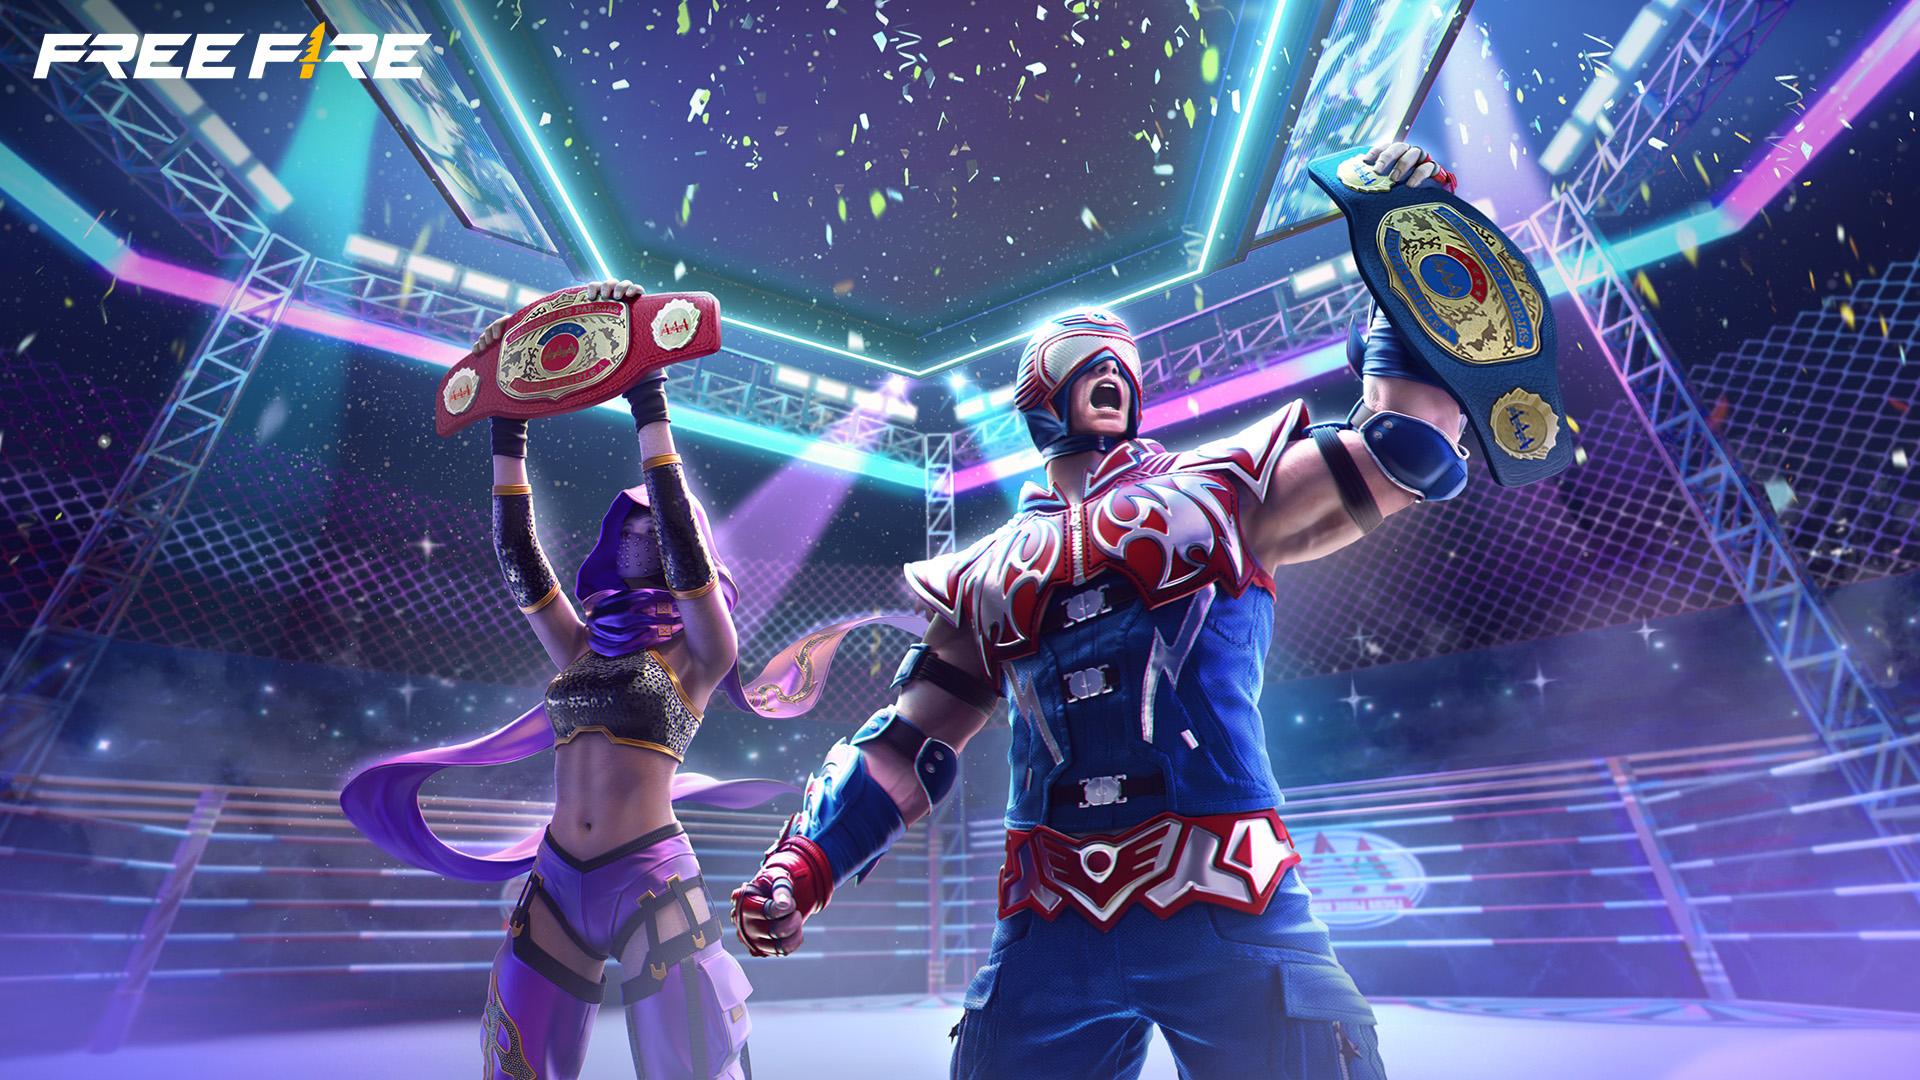 Garena Free Fire Redeem Codes of September 30: Get free diamonds, gun skins, and more rewards from the latest ACTIVE codes. How to redeem them successfully